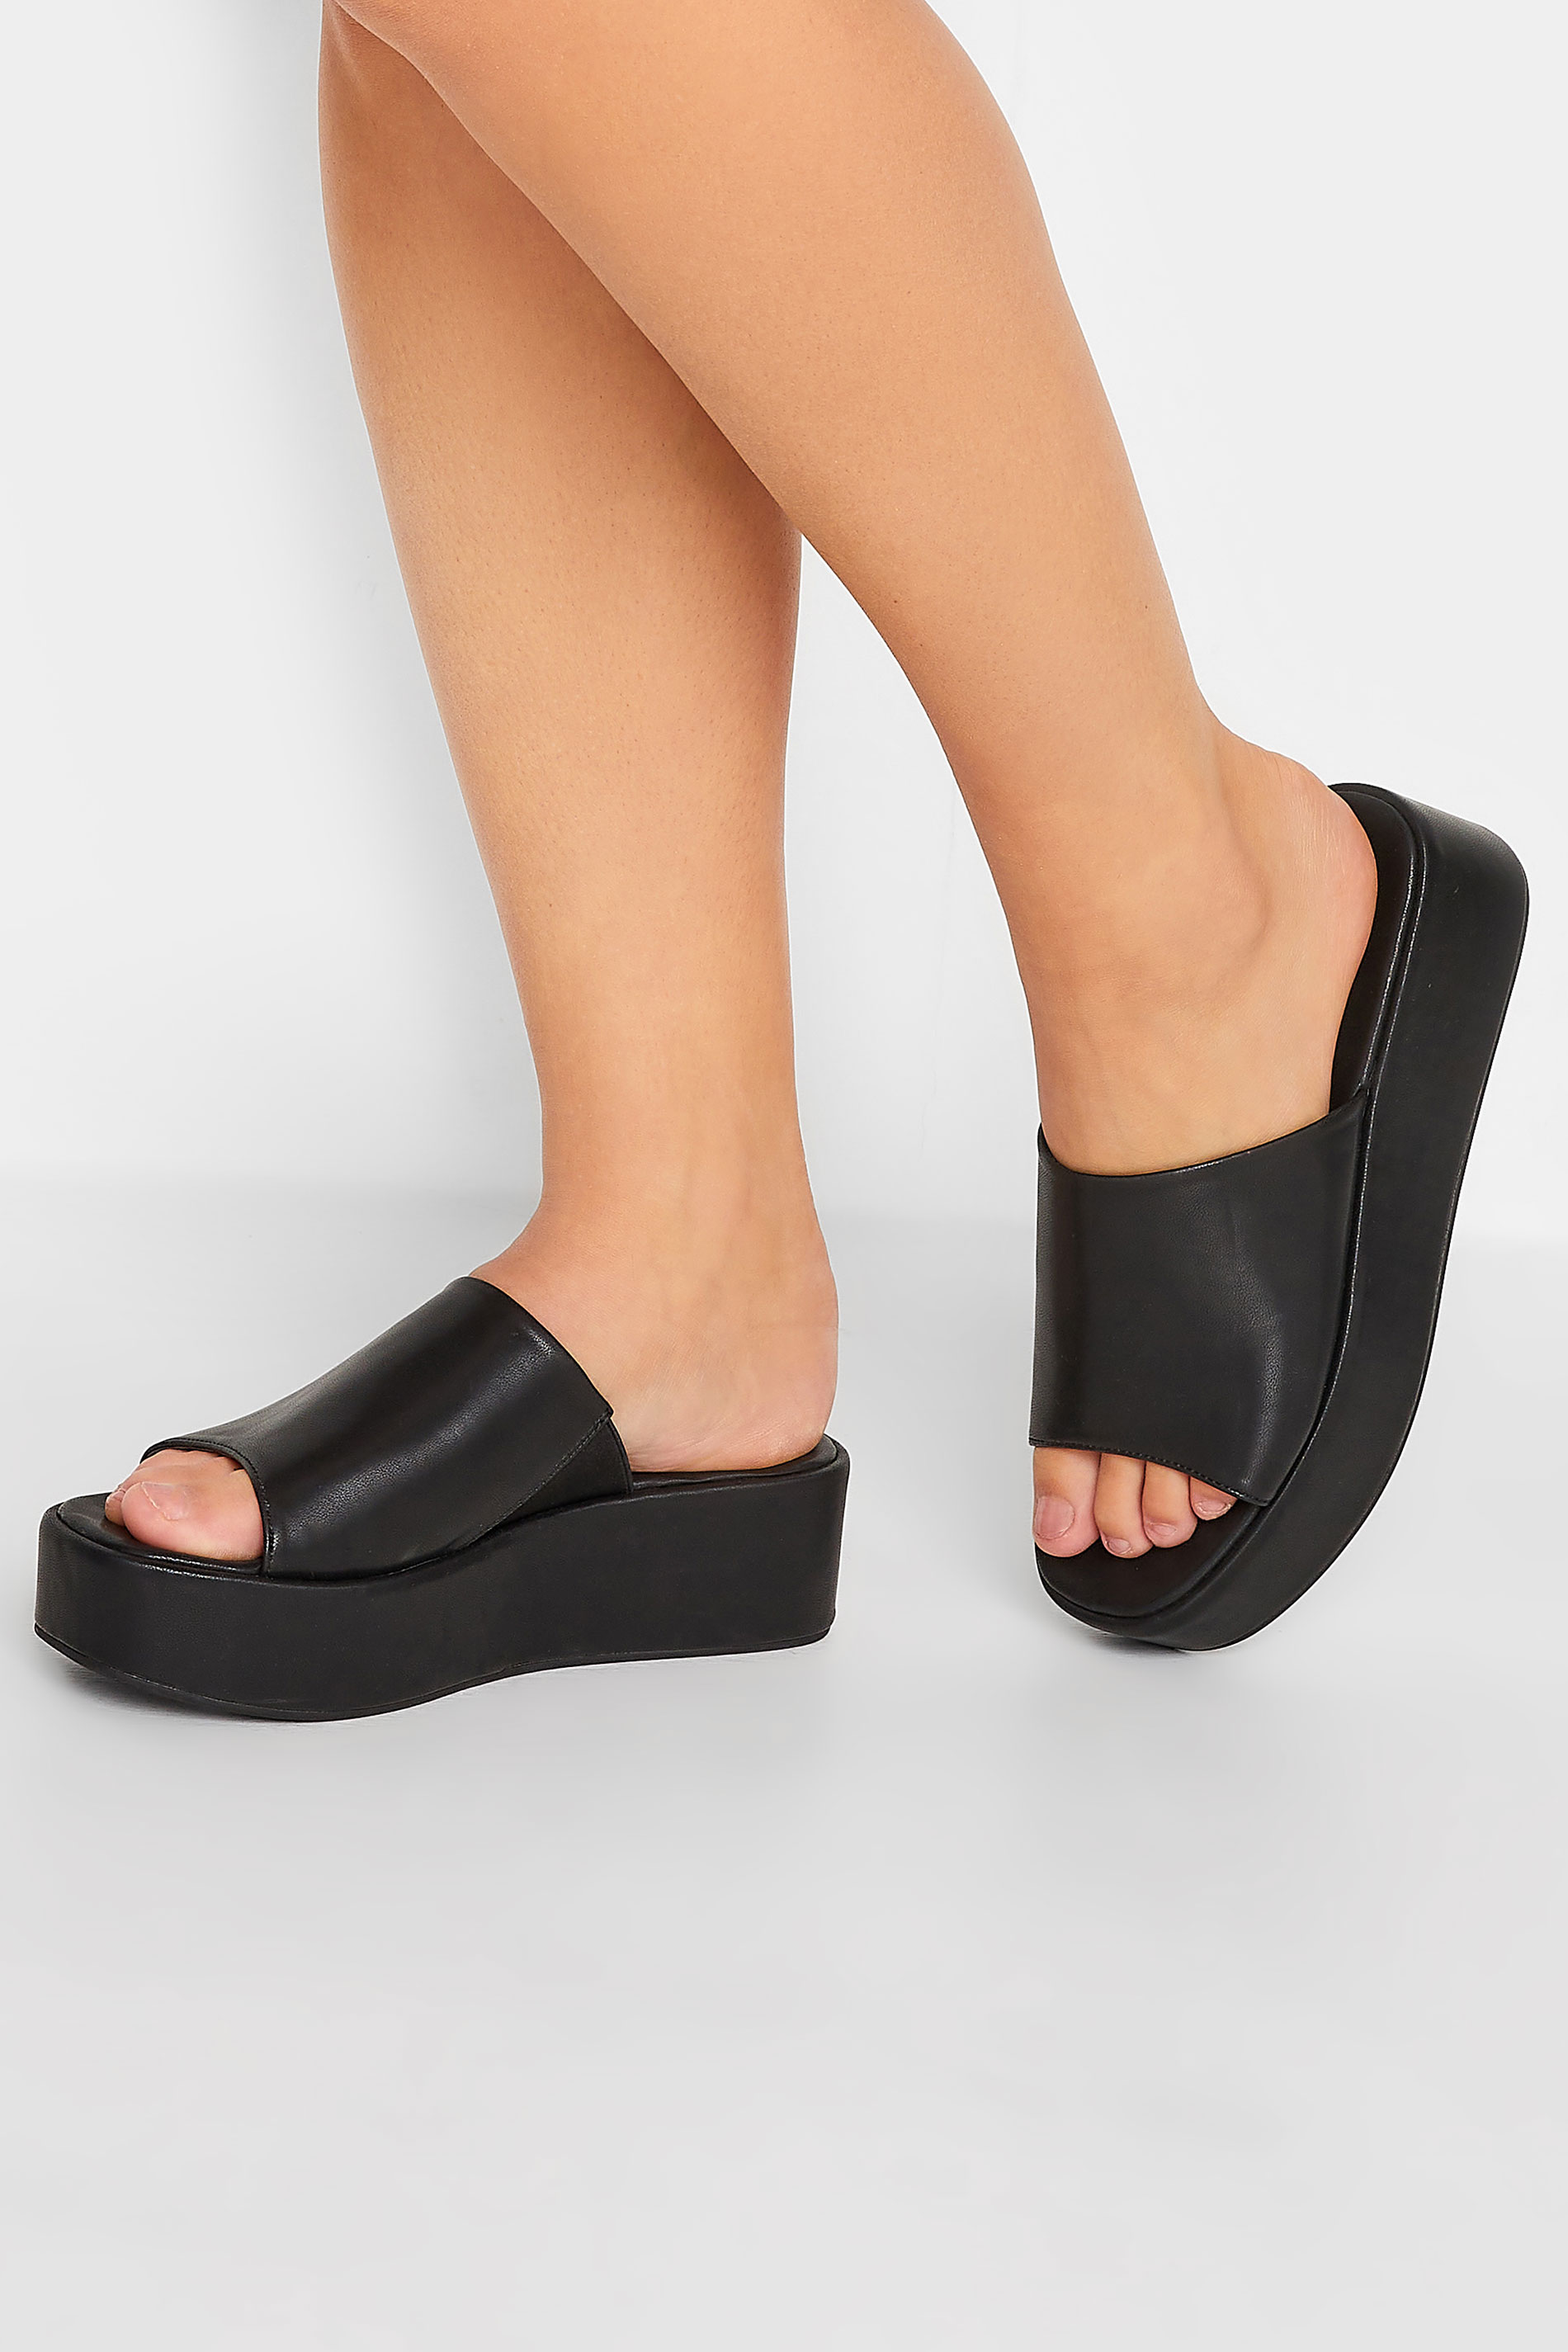 LIMITED COLLECTION Black Platform Mule Sandals In E Wide Fit & EEE Extra Wide Fit 1